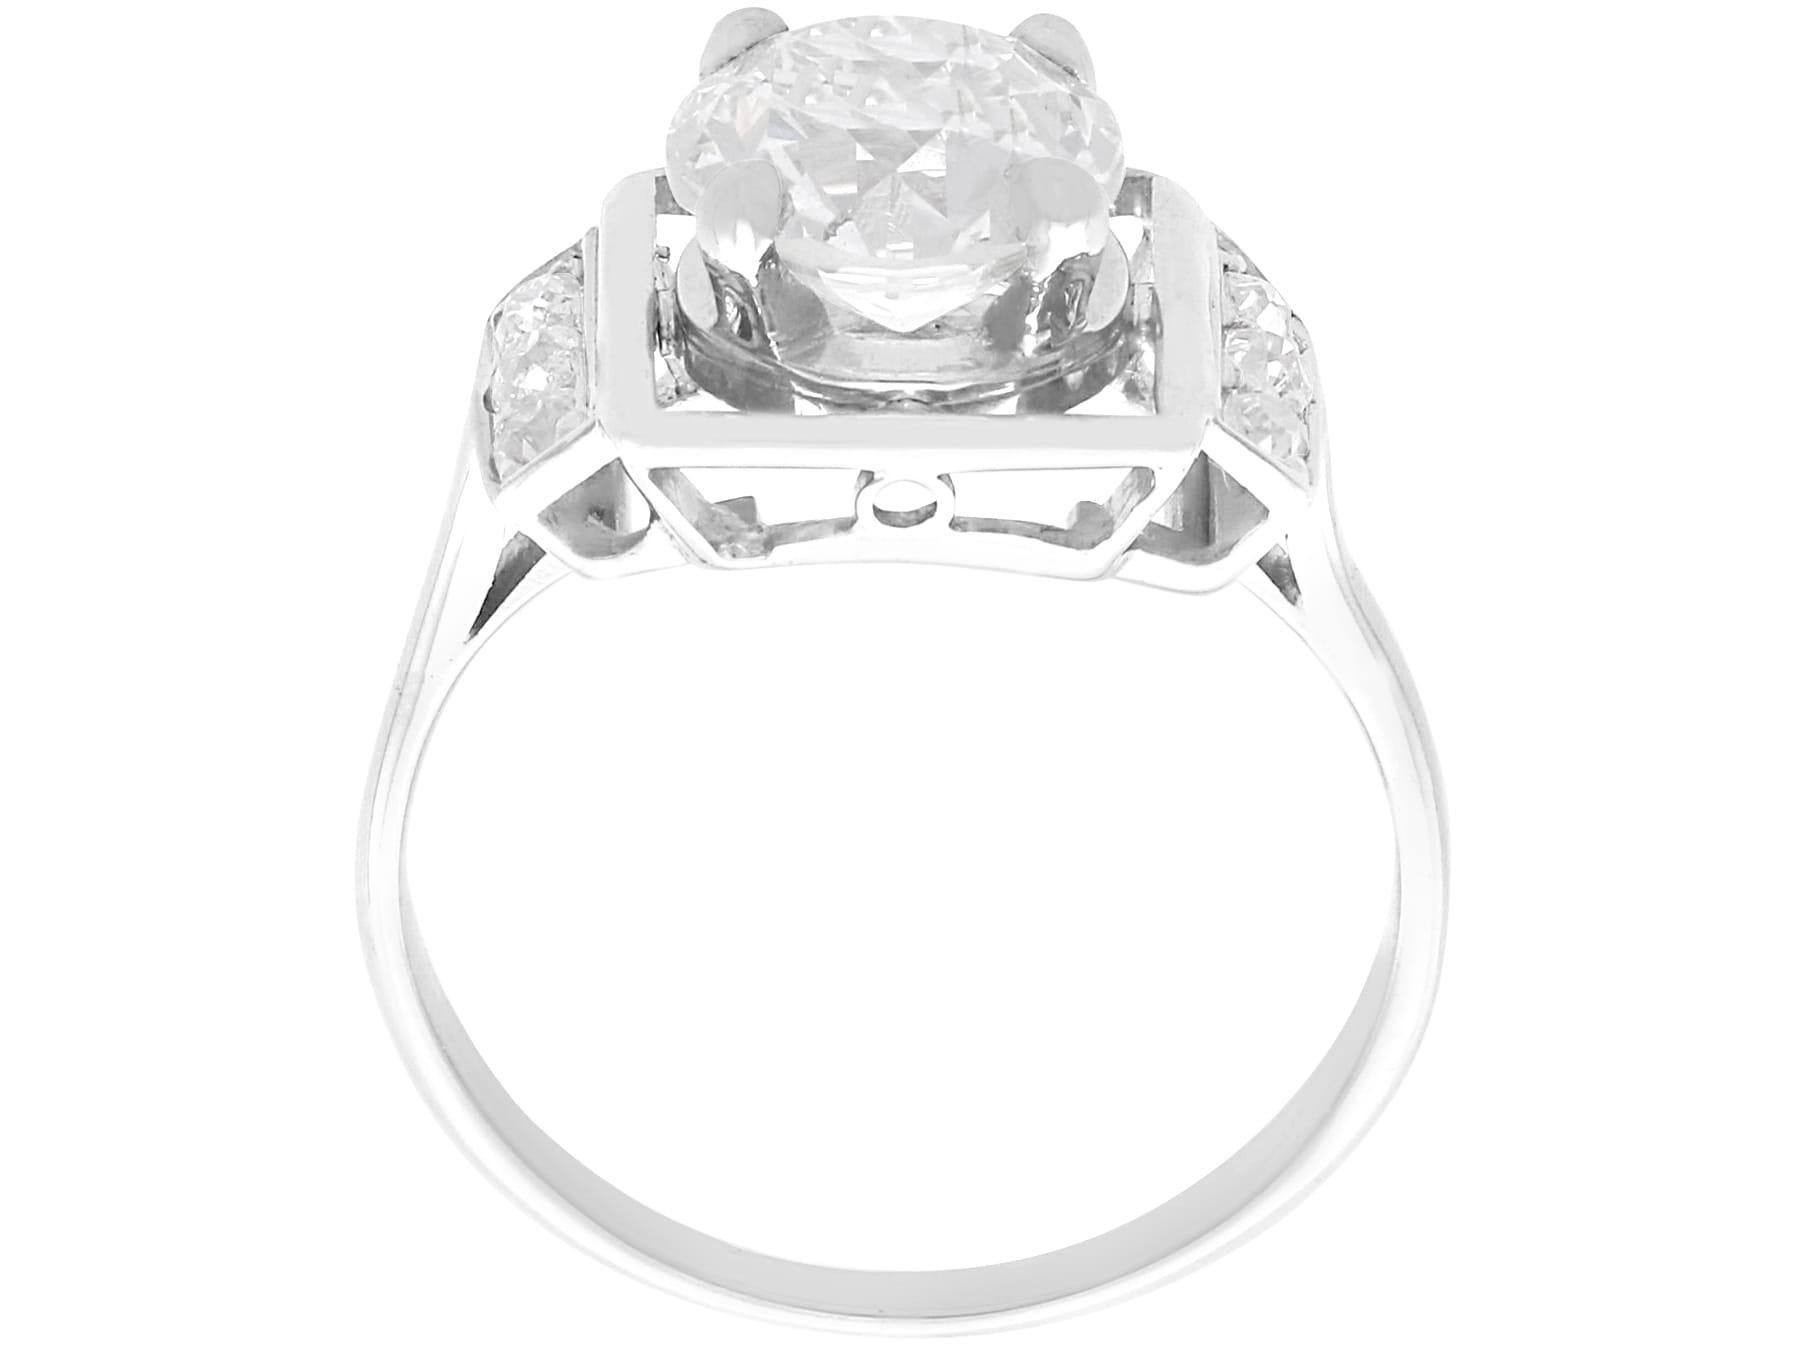 Women's or Men's Art Deco GIA Certified 2.19 Carat Diamond and White Gold Solitaire Ring For Sale